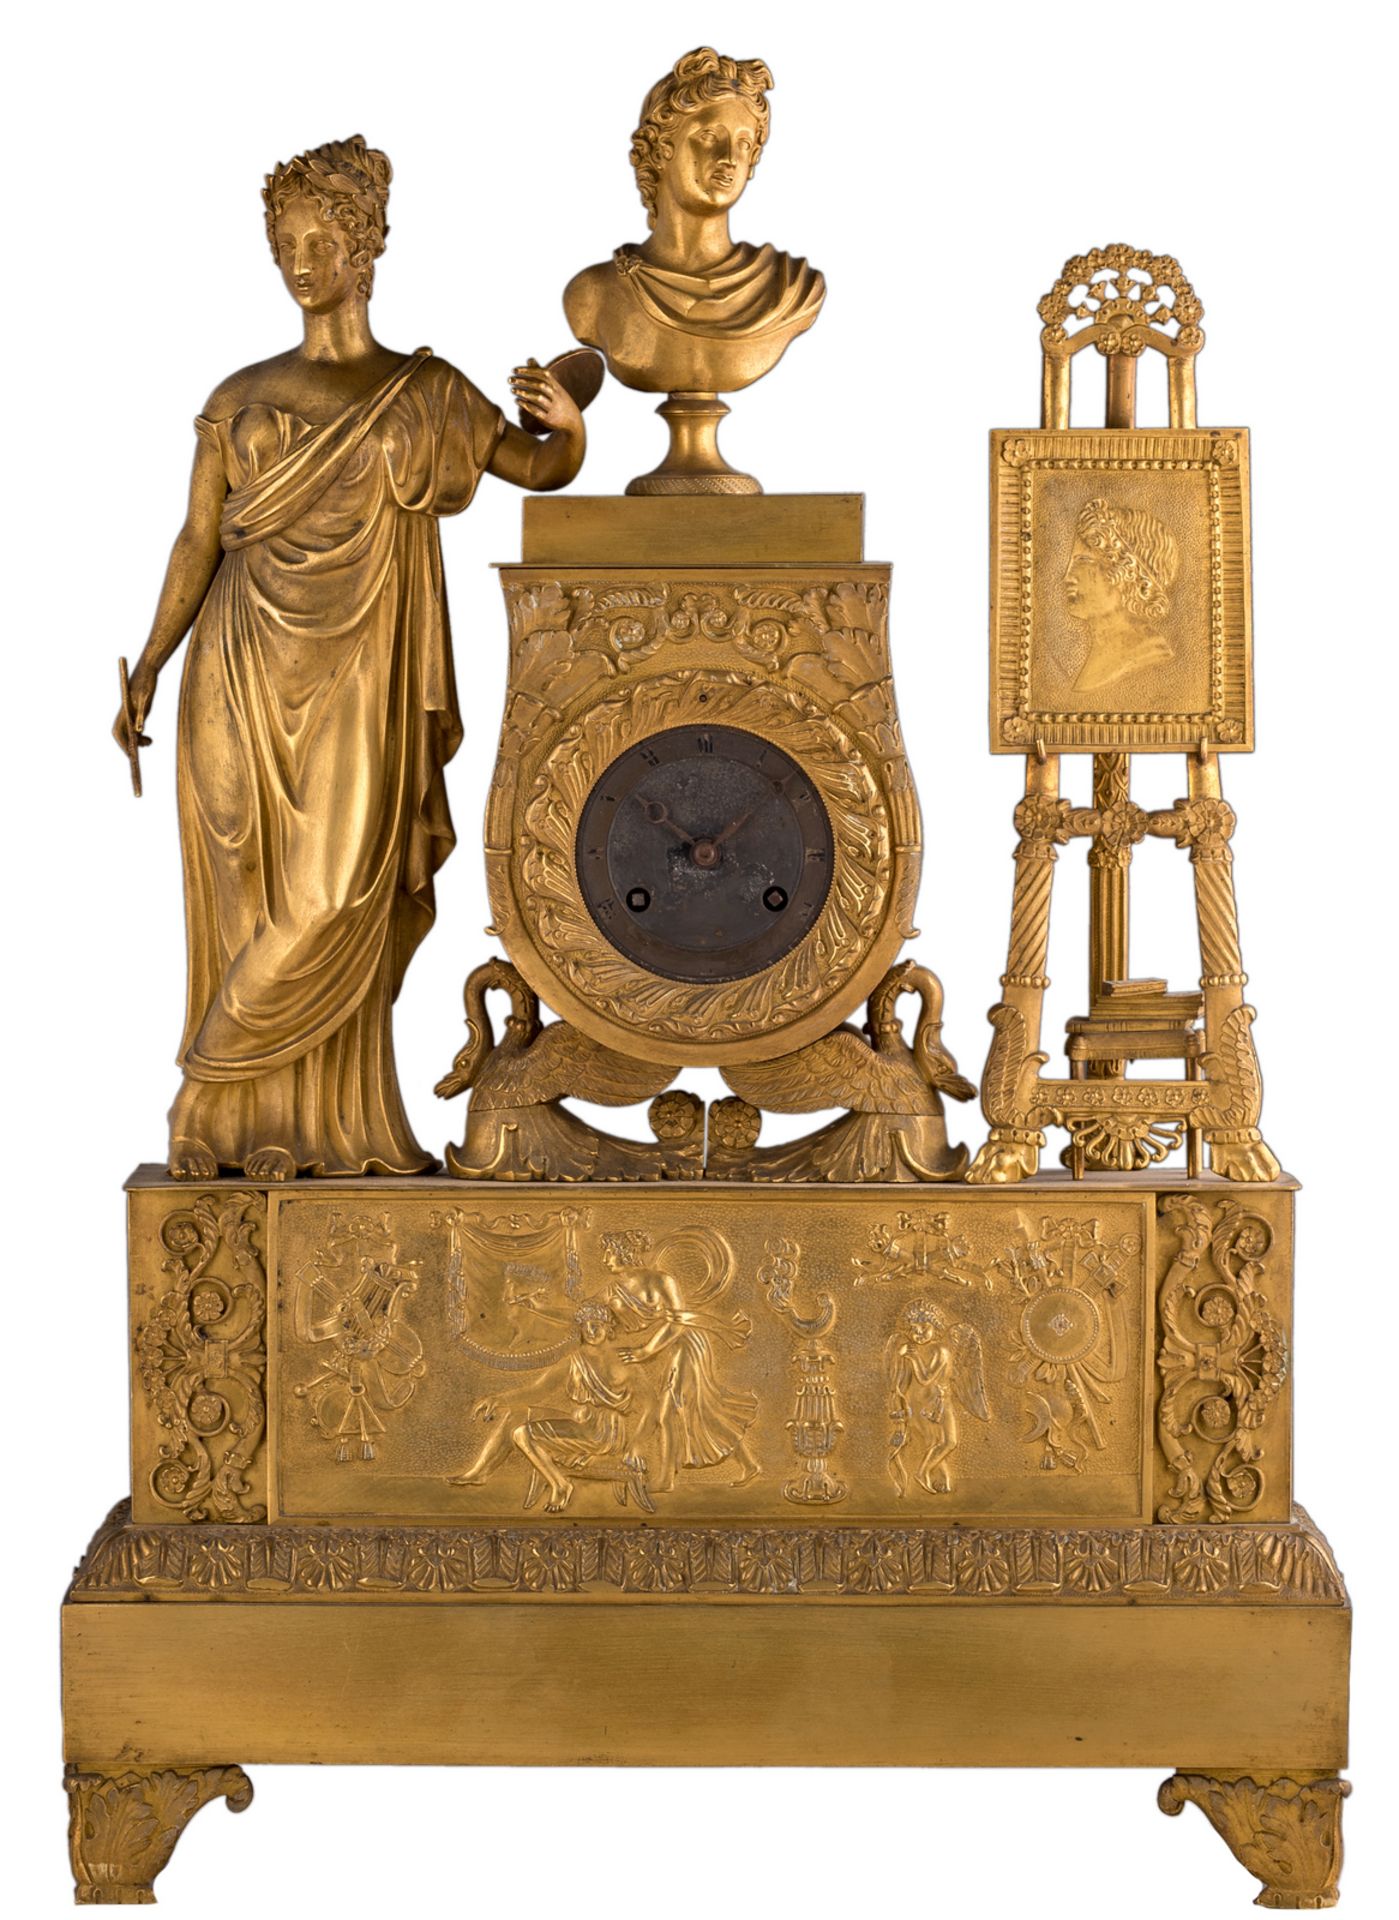 A French neoclassical gilt bronze second quarter of the 19thC mantel clock with on top a group